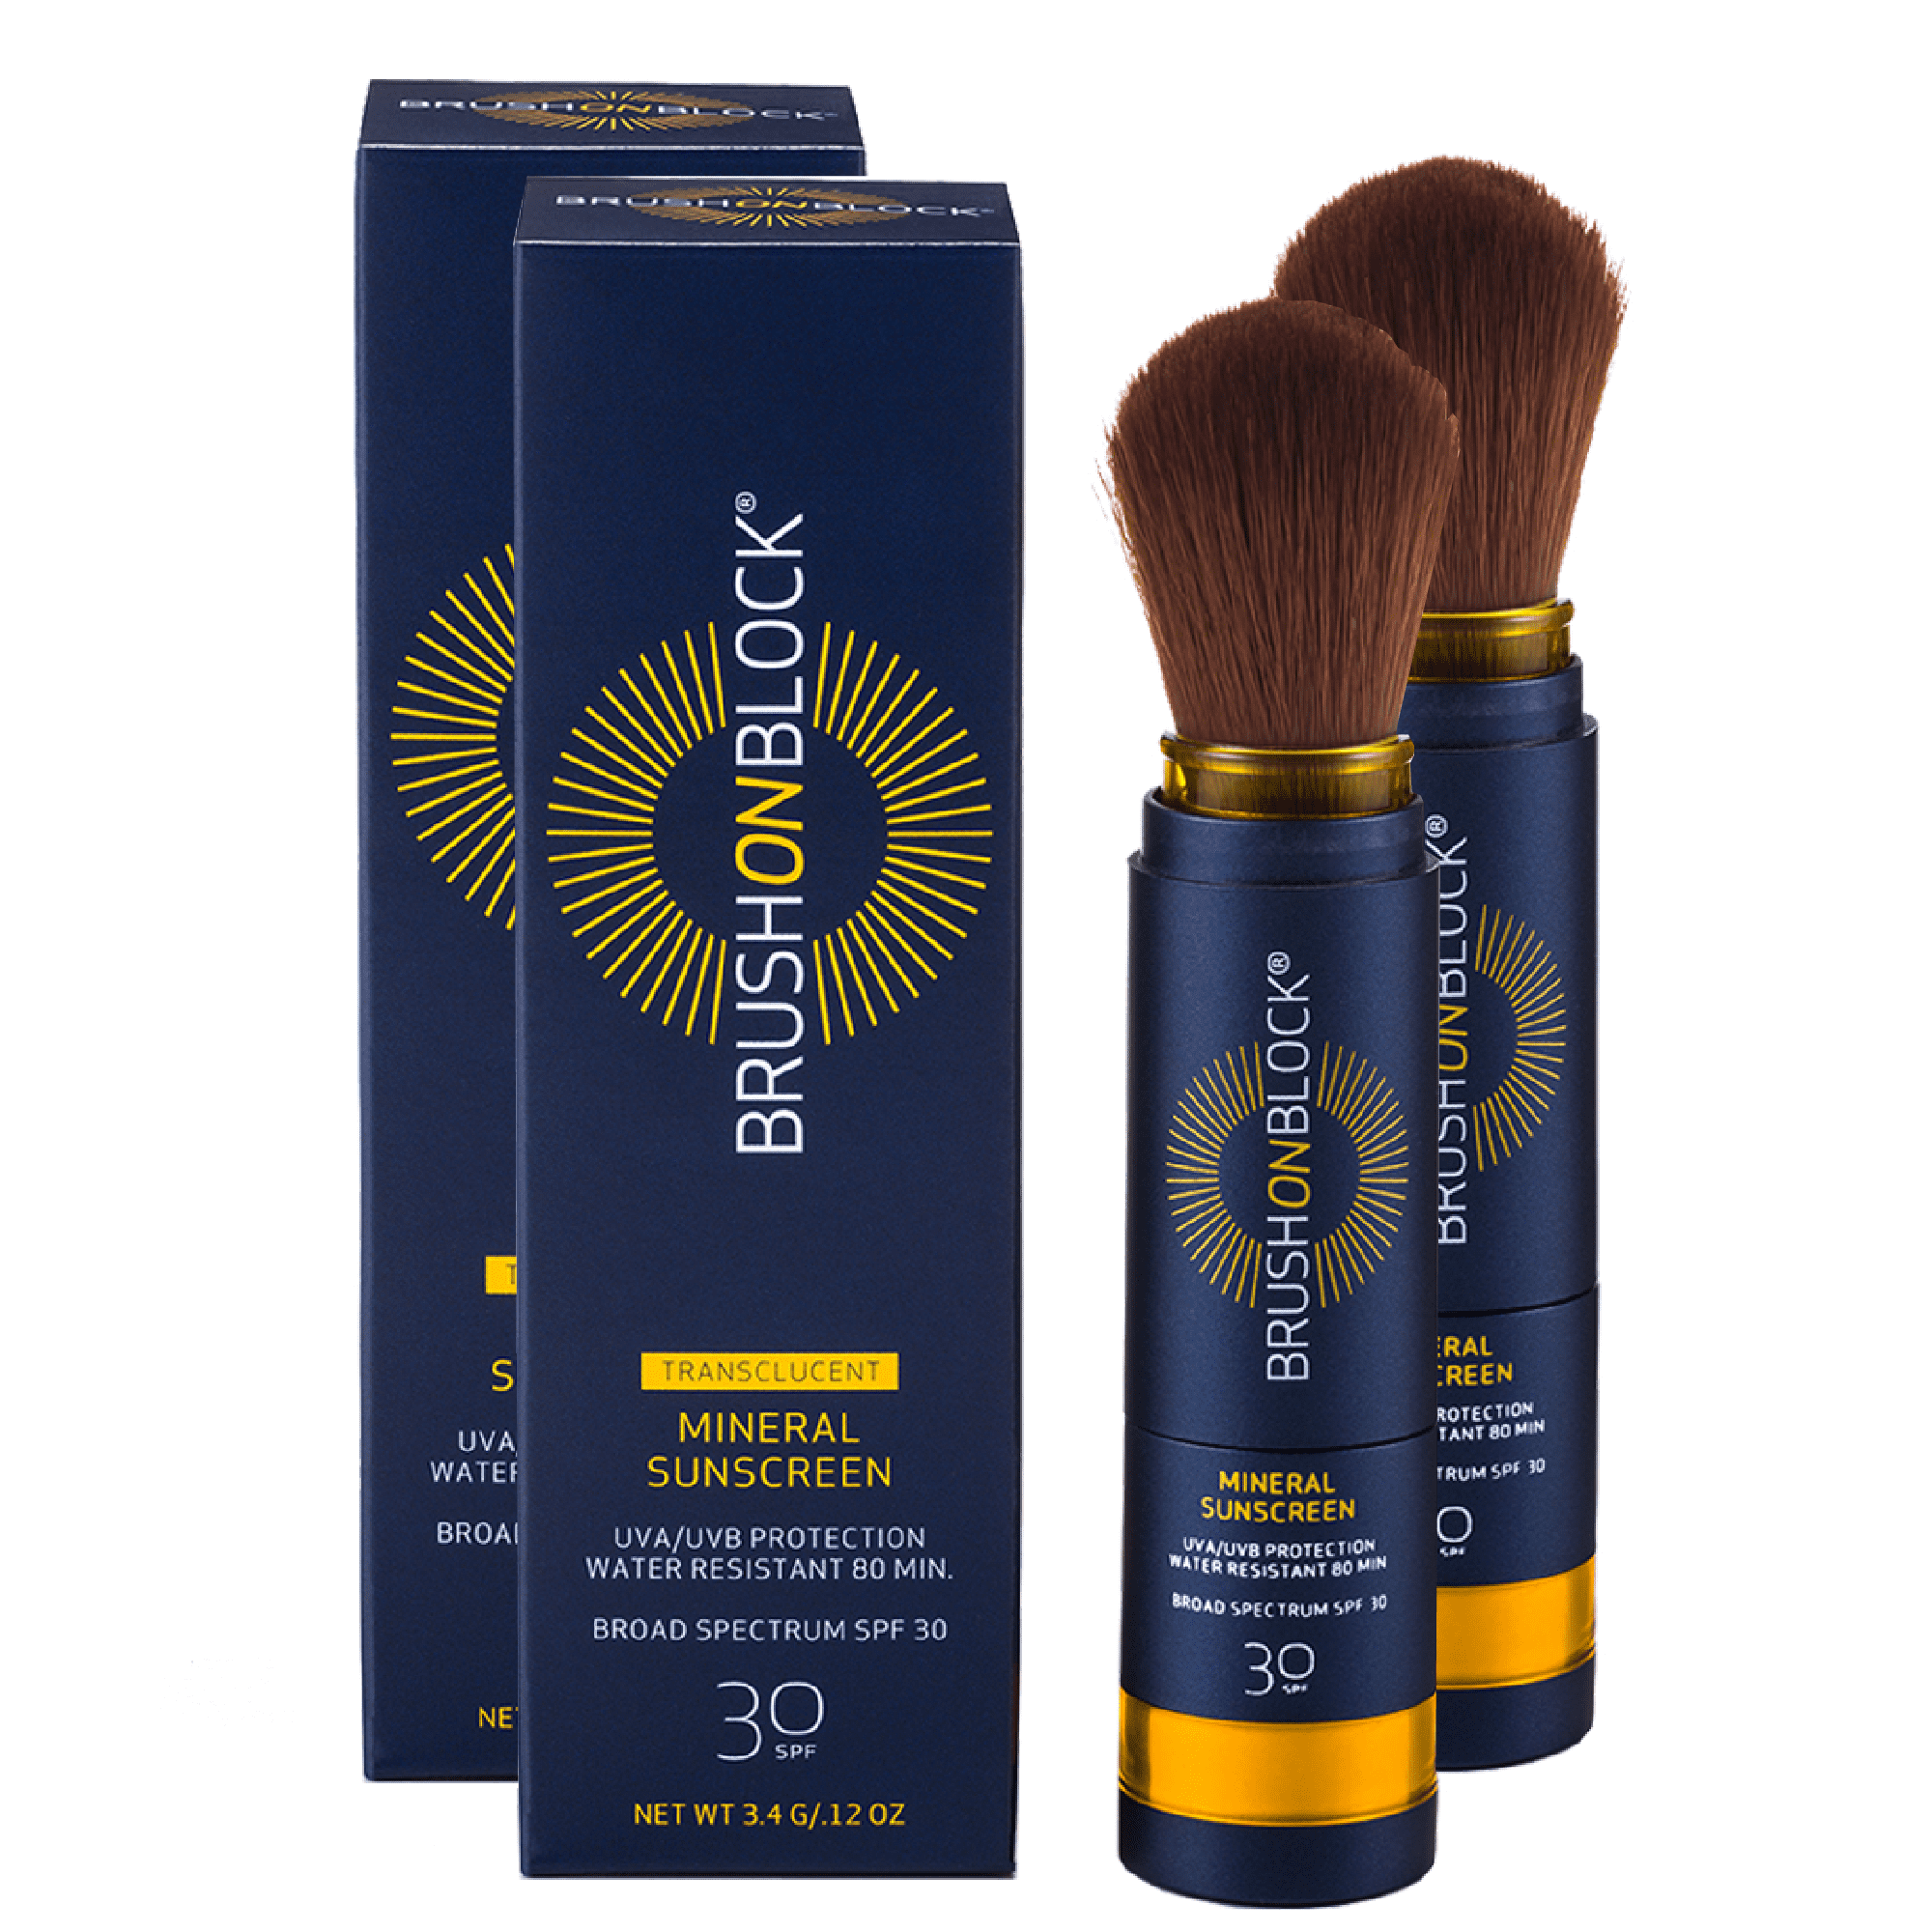 the best duo we've ever - Brush On Block Mineral Sunscreen